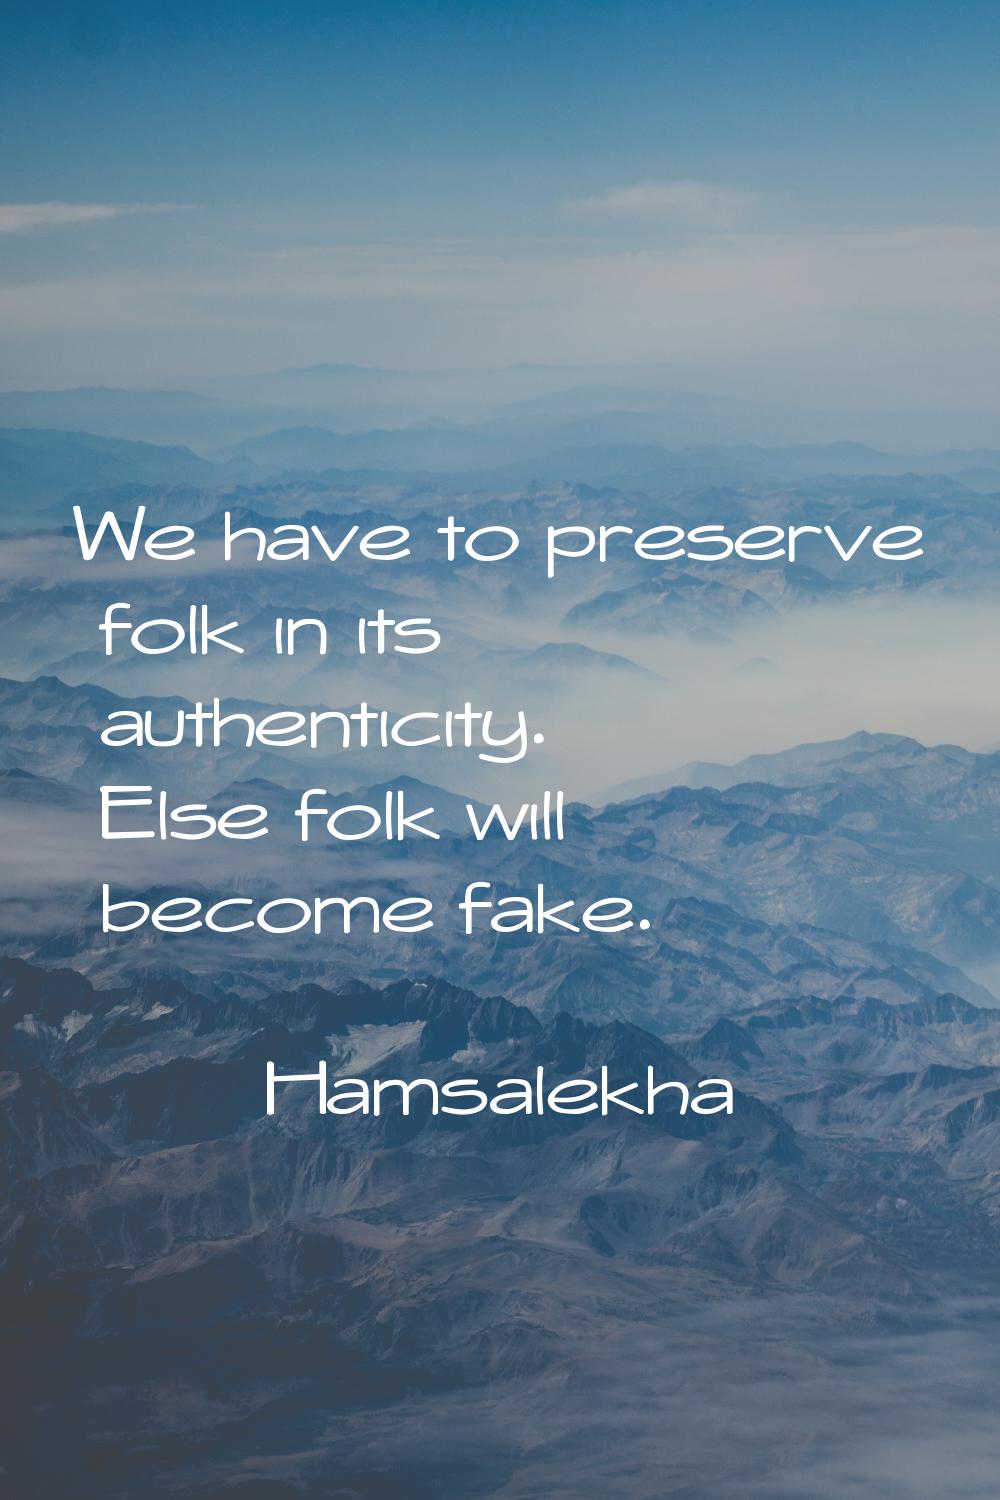 We have to preserve folk in its authenticity. Else folk will become fake.